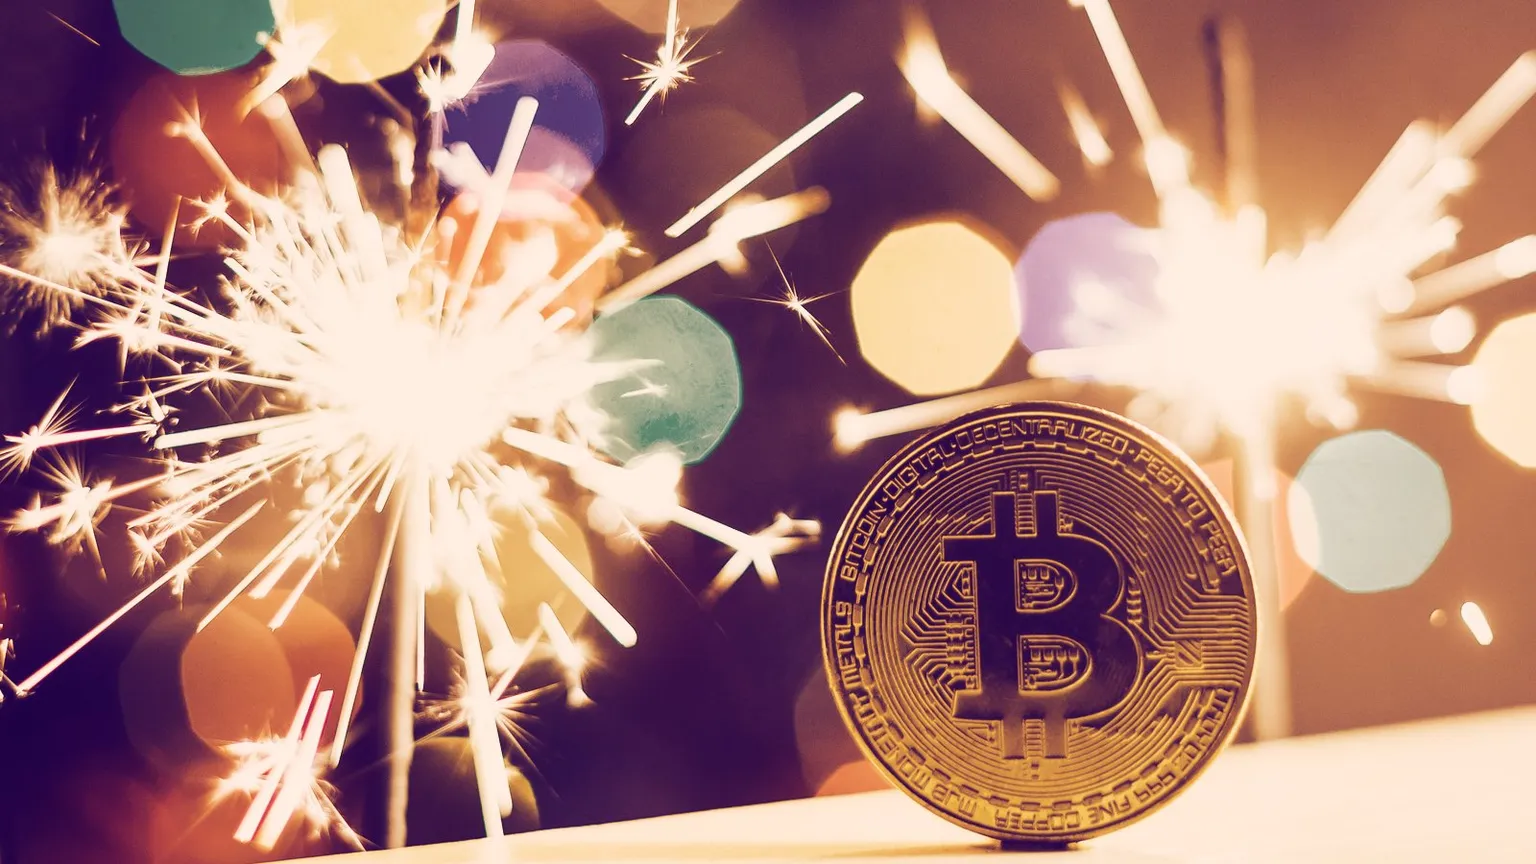 Bitcoin is on the up. But so is DeFi. Image: Shutterstock